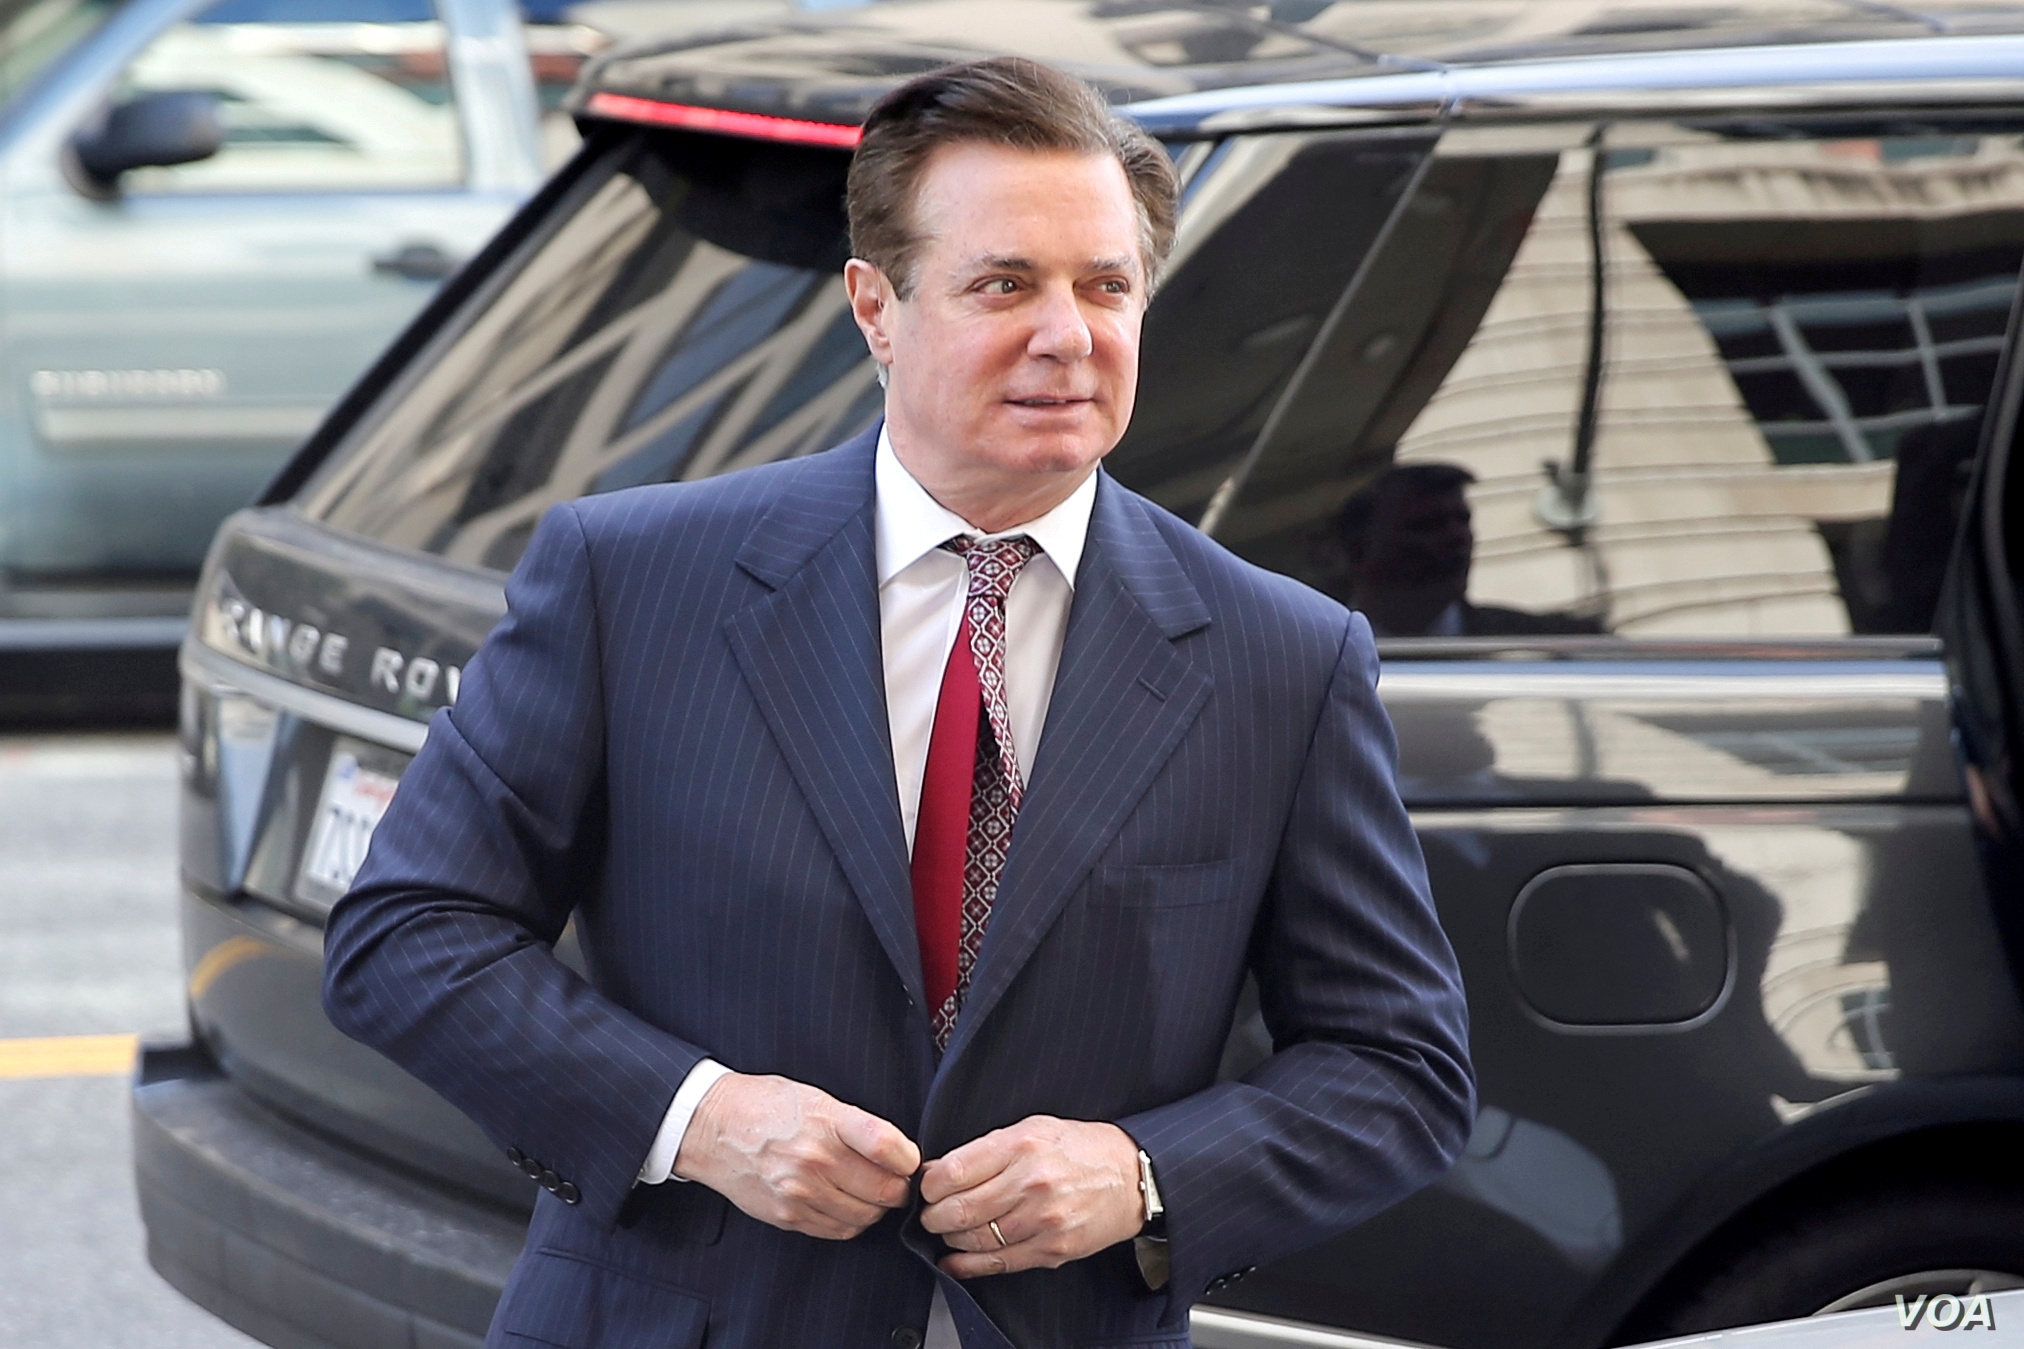 New York state court dismisses state fraud charges against Paul Manafort under double jeopardy law